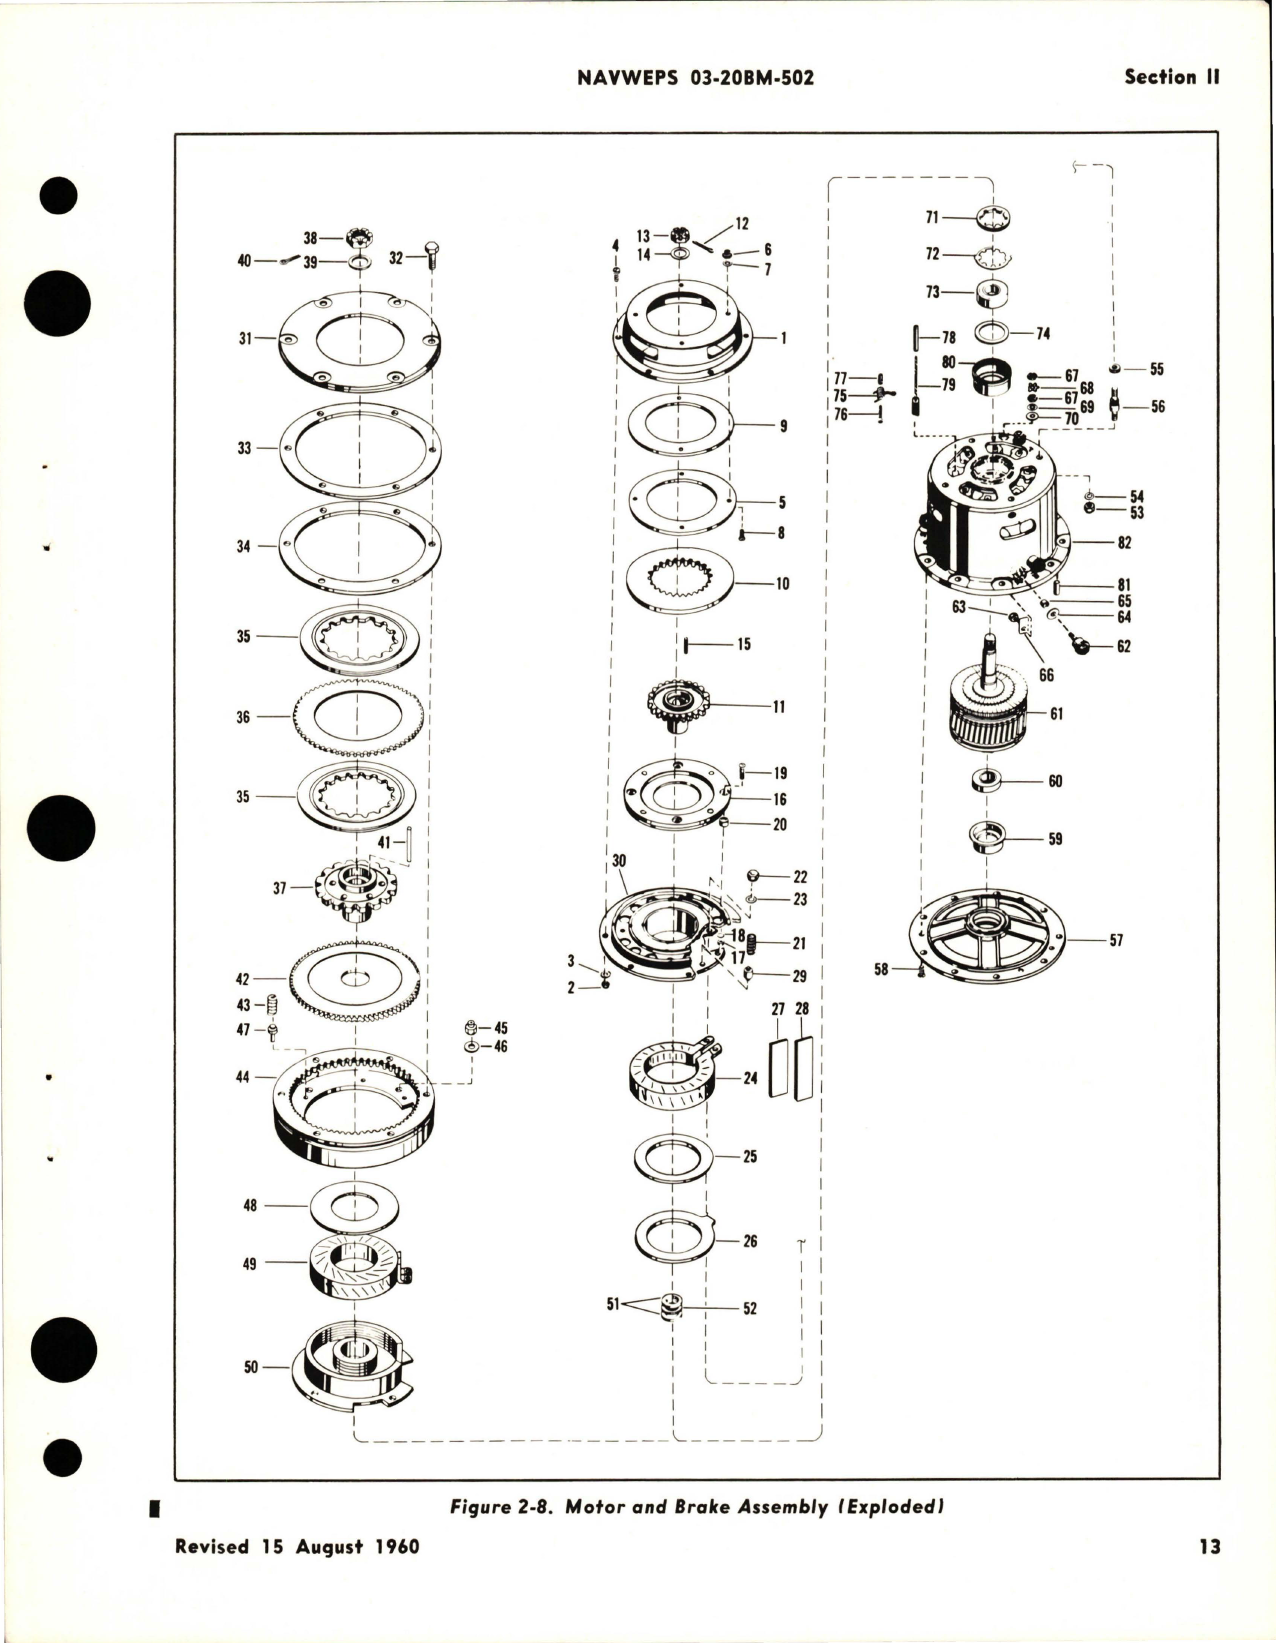 Sample page 7 from AirCorps Library document: Overhaul Instructions for Electric Propeller and Controls - C634S-C104 